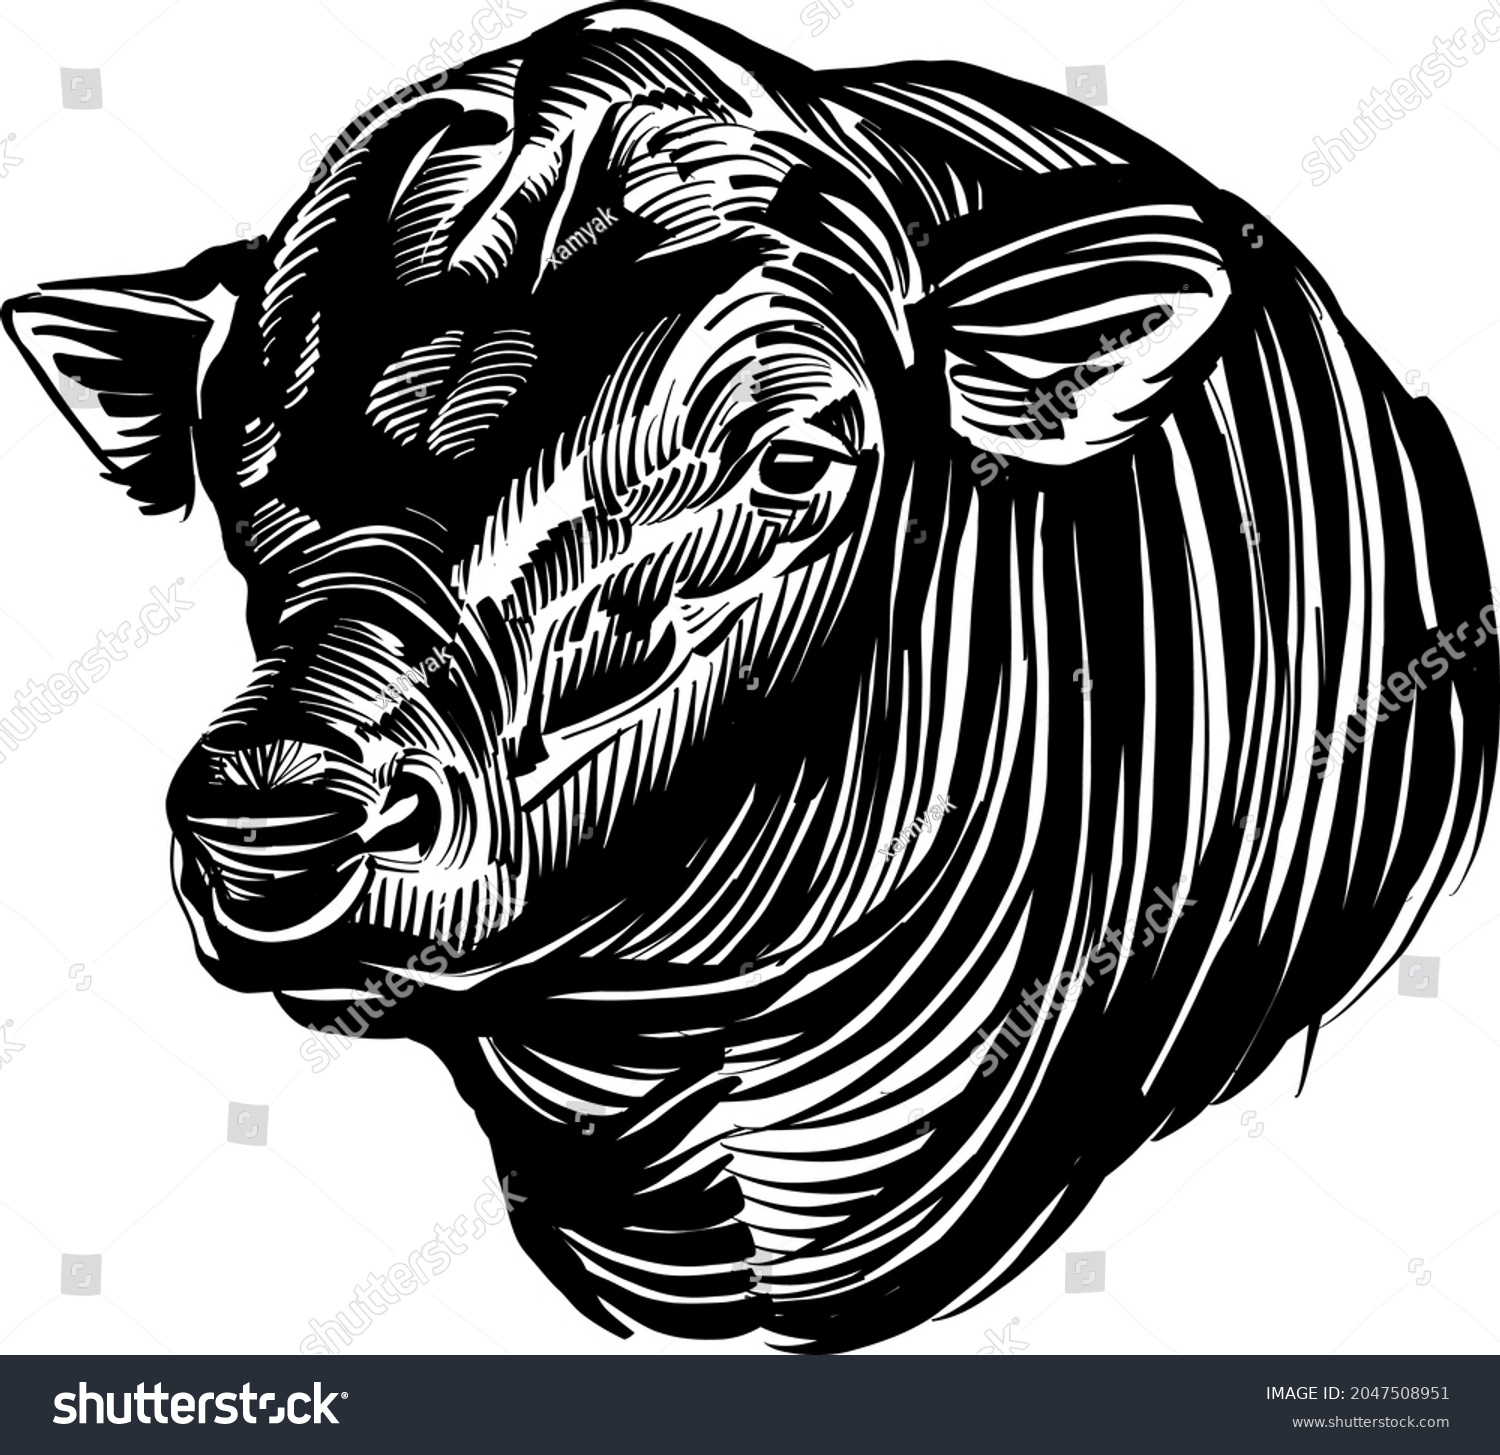 SVG of the vector illustration sketch of the bull head Angus svg